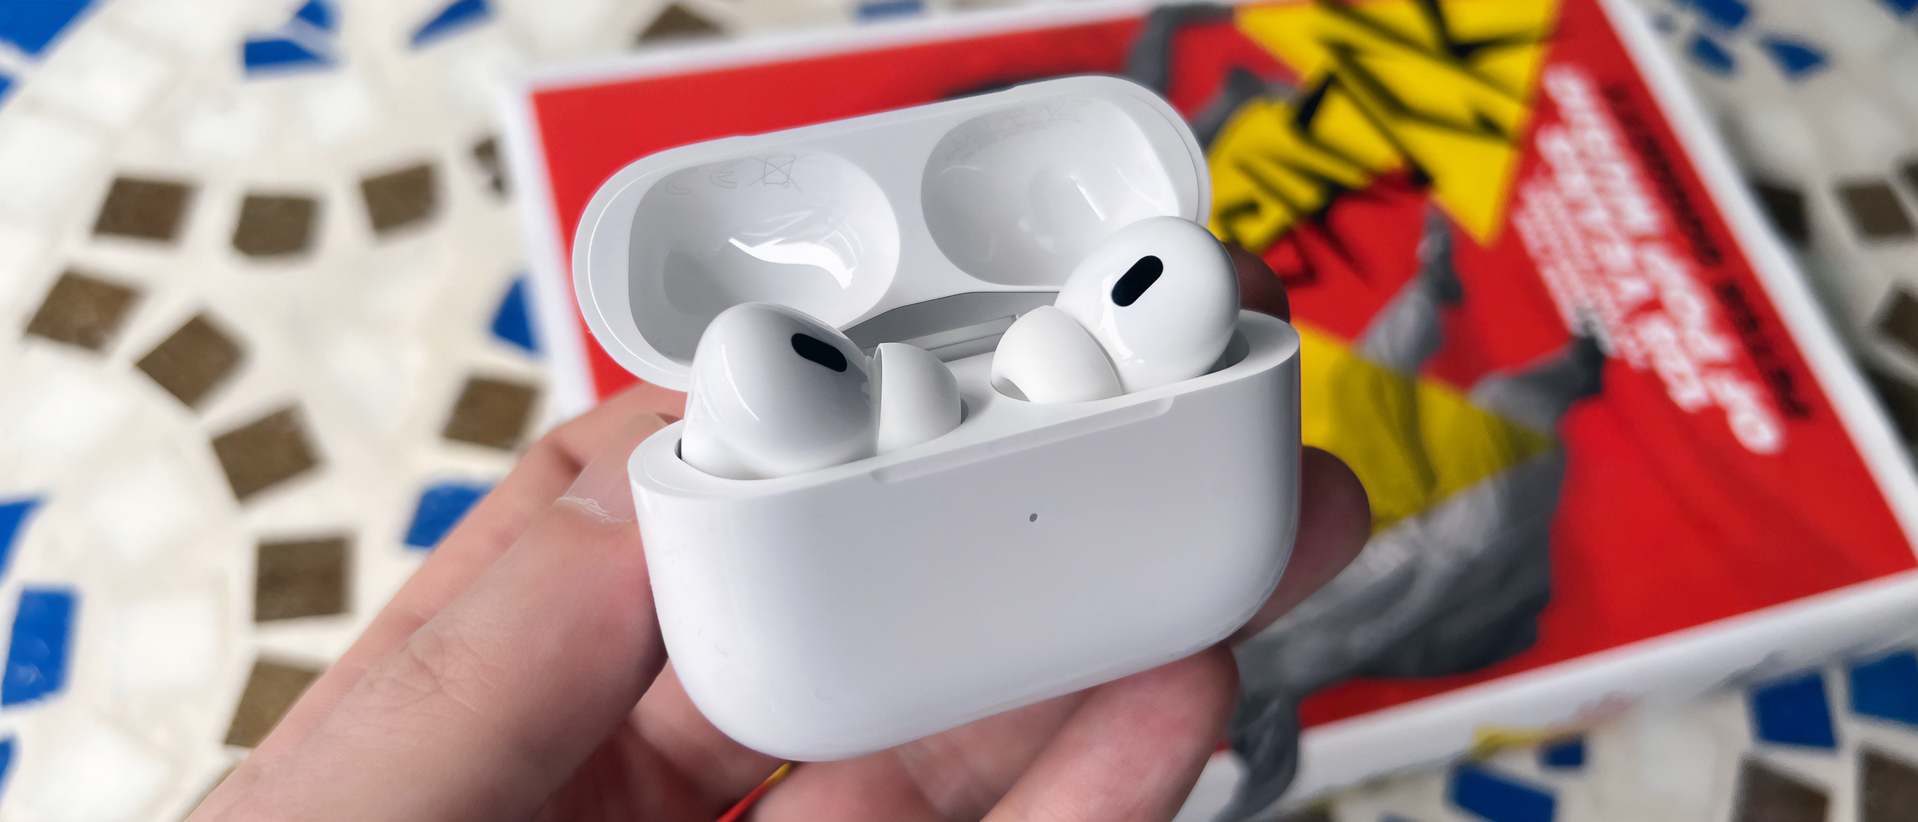 The 6 Best New AirPods Pro Features